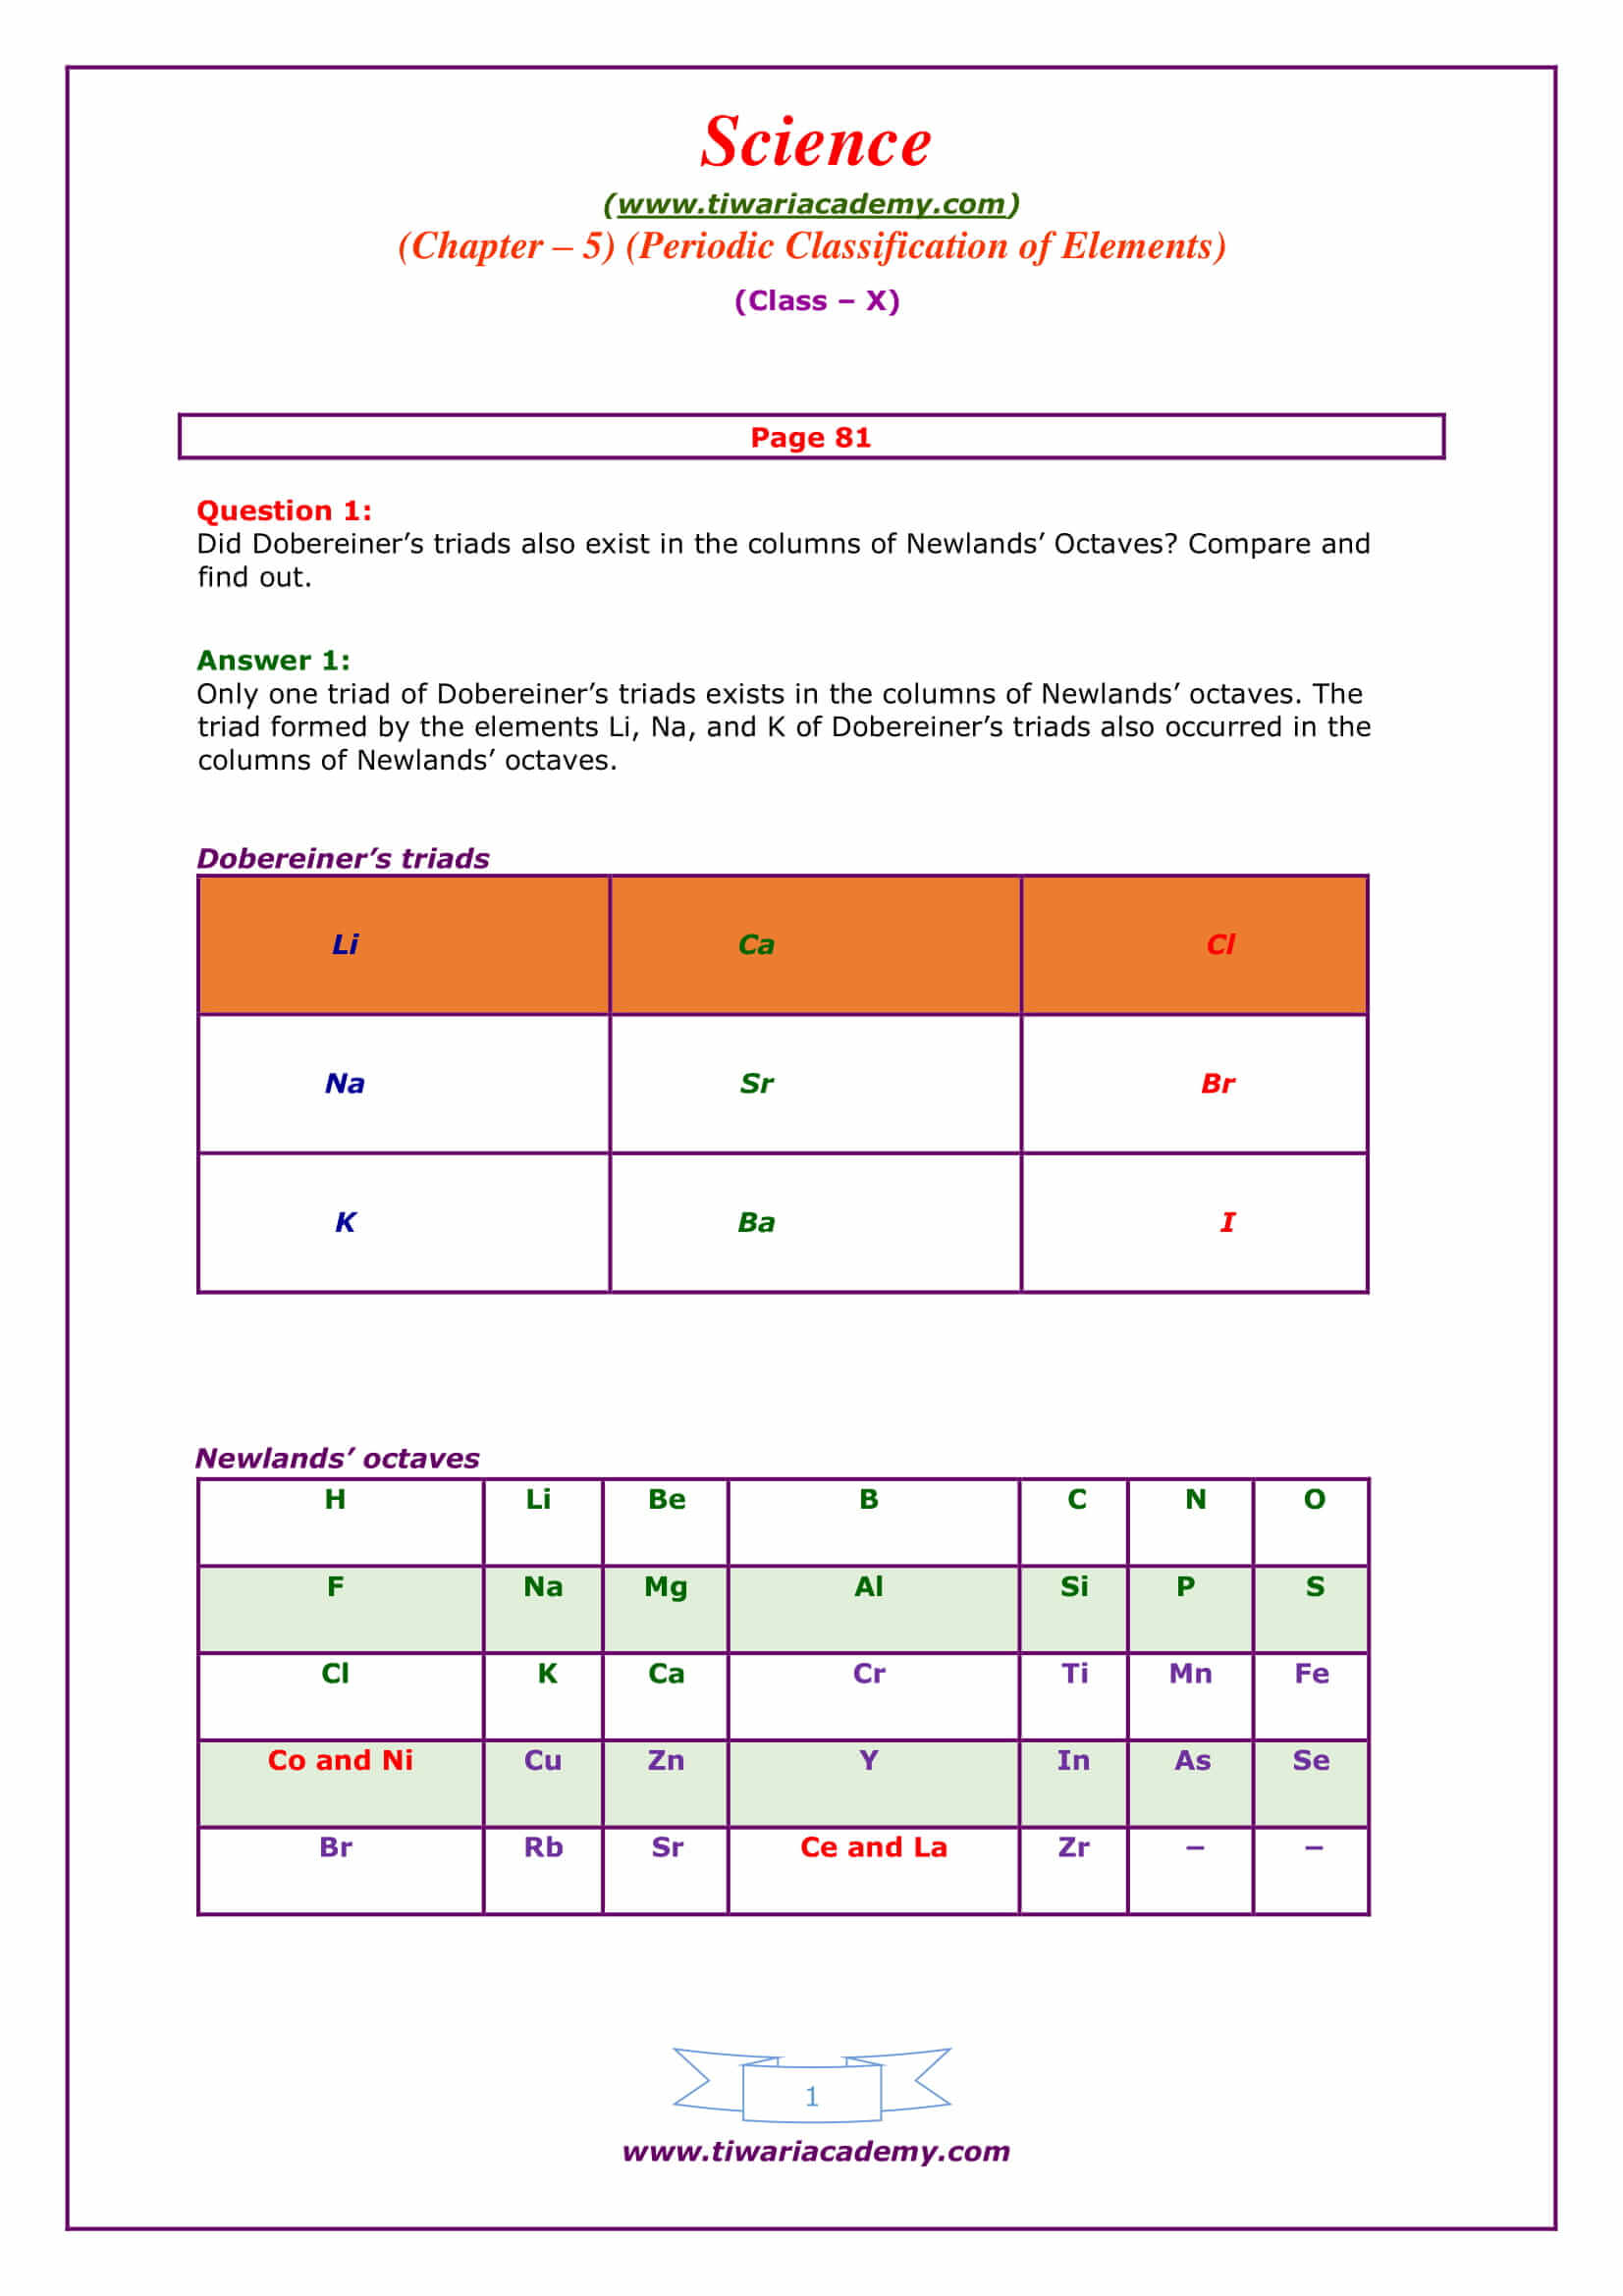 10 Science Chapter 5 Periodic Classification of elements page 81 answers